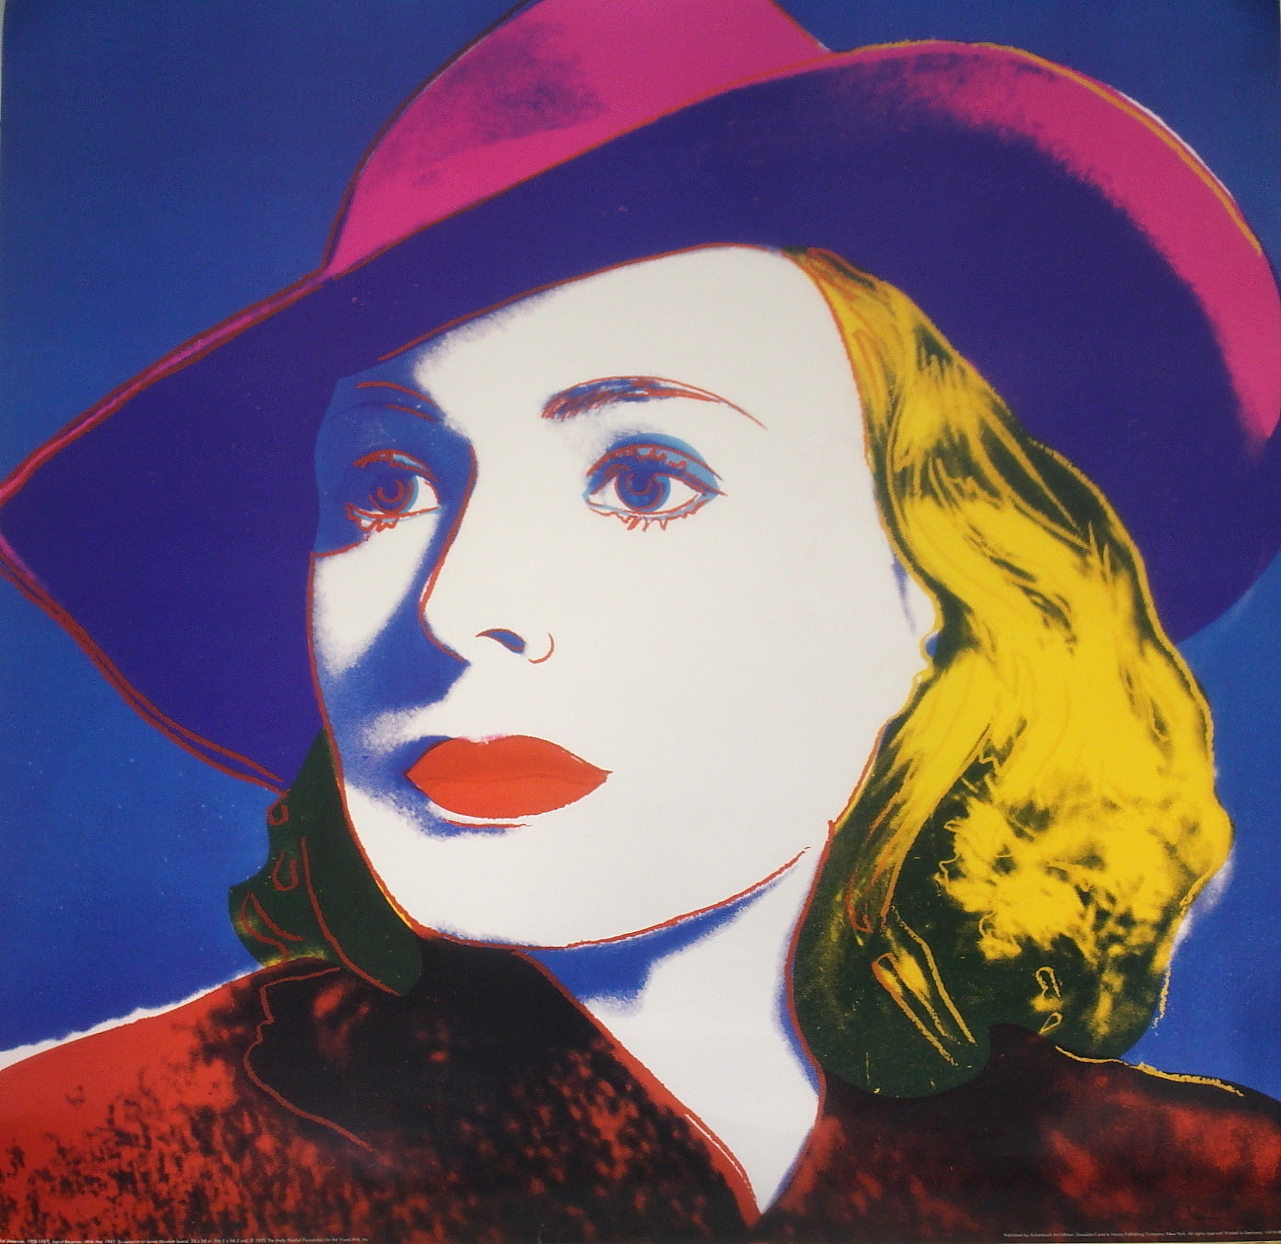 10 Most Famous Andy Warhol Paintings